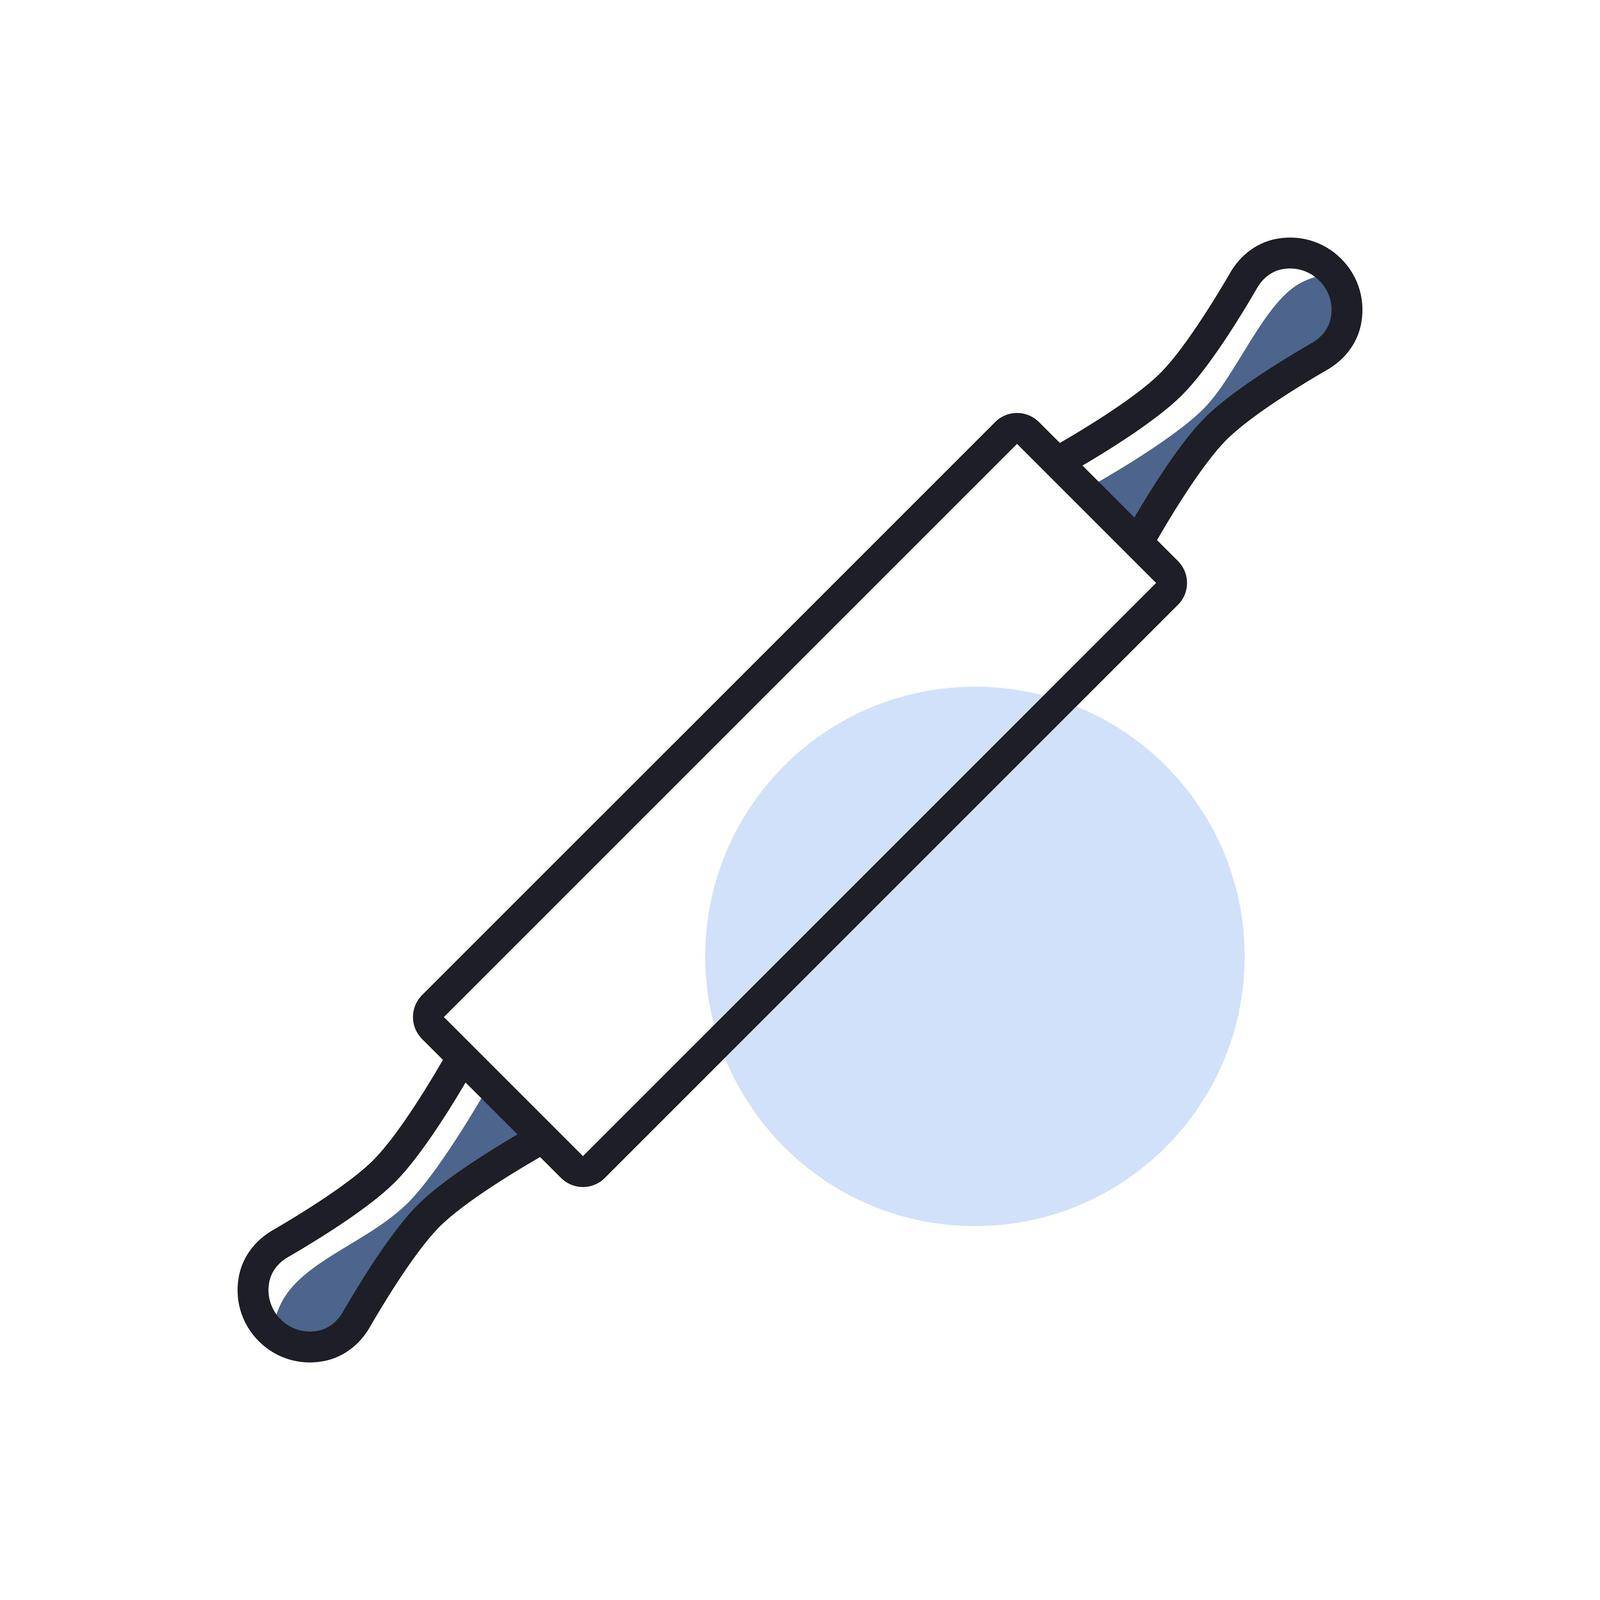 Wooden rolling pin plunger vector icon. Kitchen appliance. Graph symbol for cooking web site design, logo, app, UI